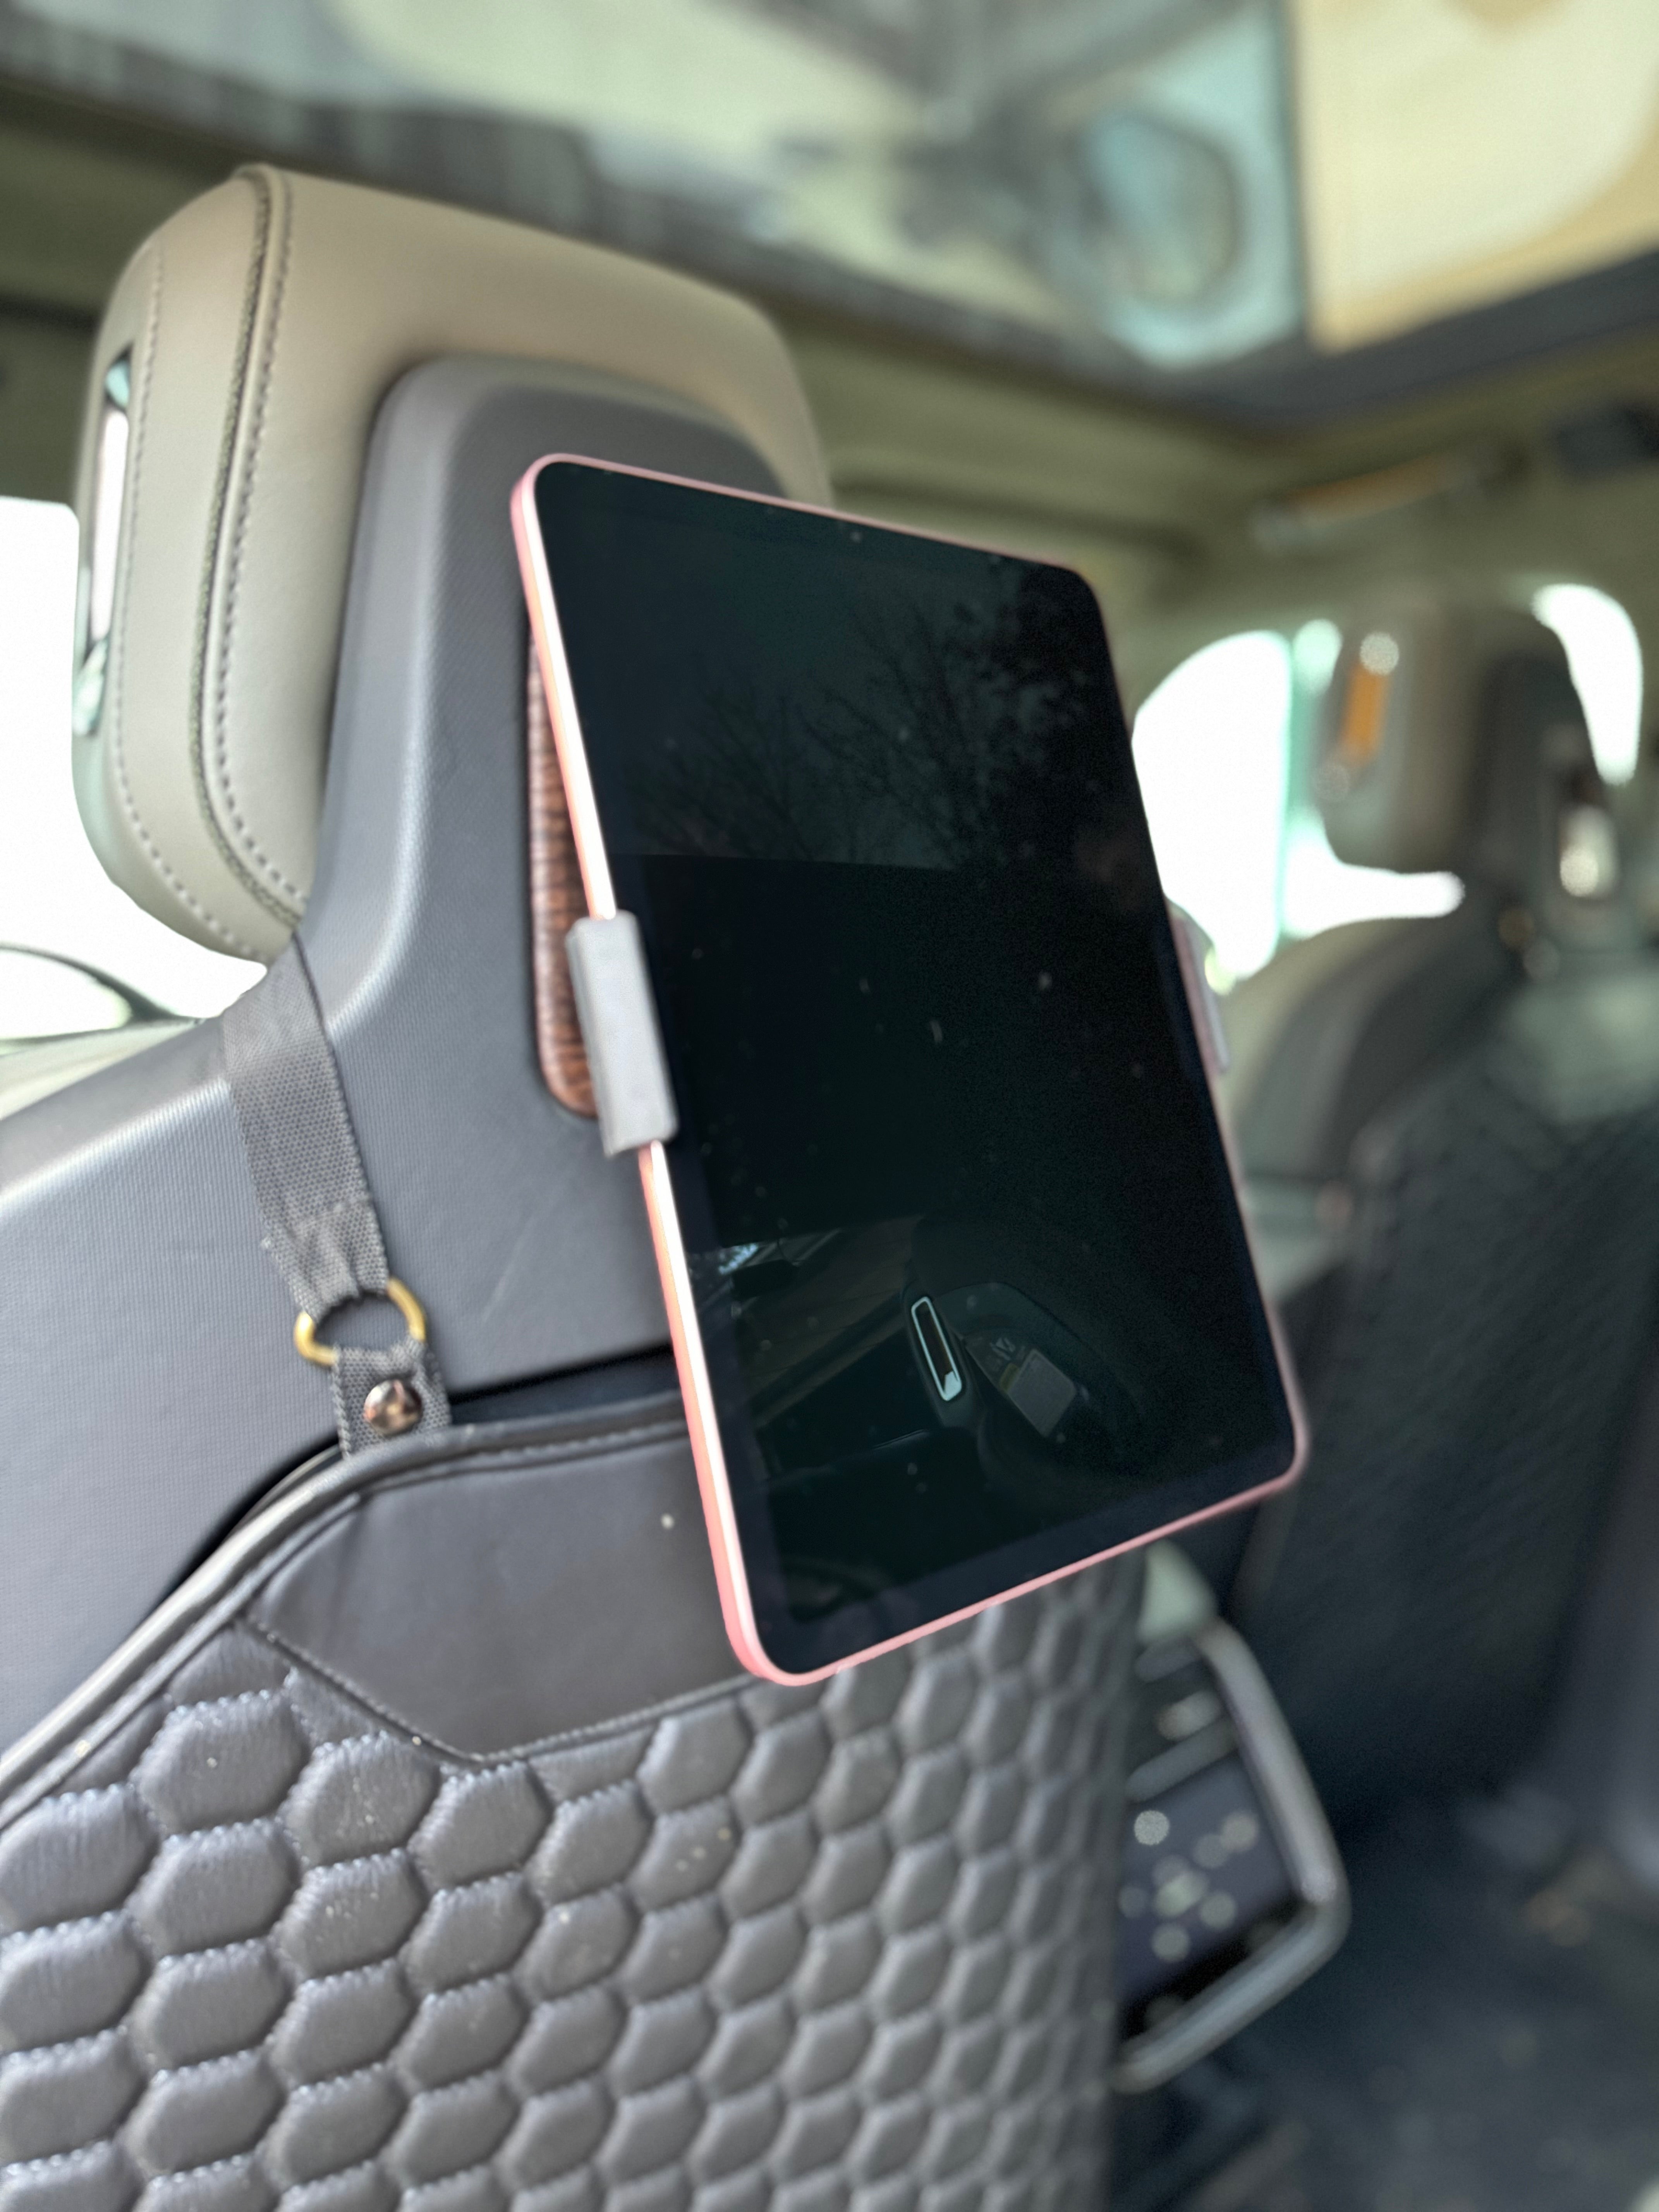 Universal Seat Back Mount for Rivian R1T and R1S (iPad and iPad mount not included)